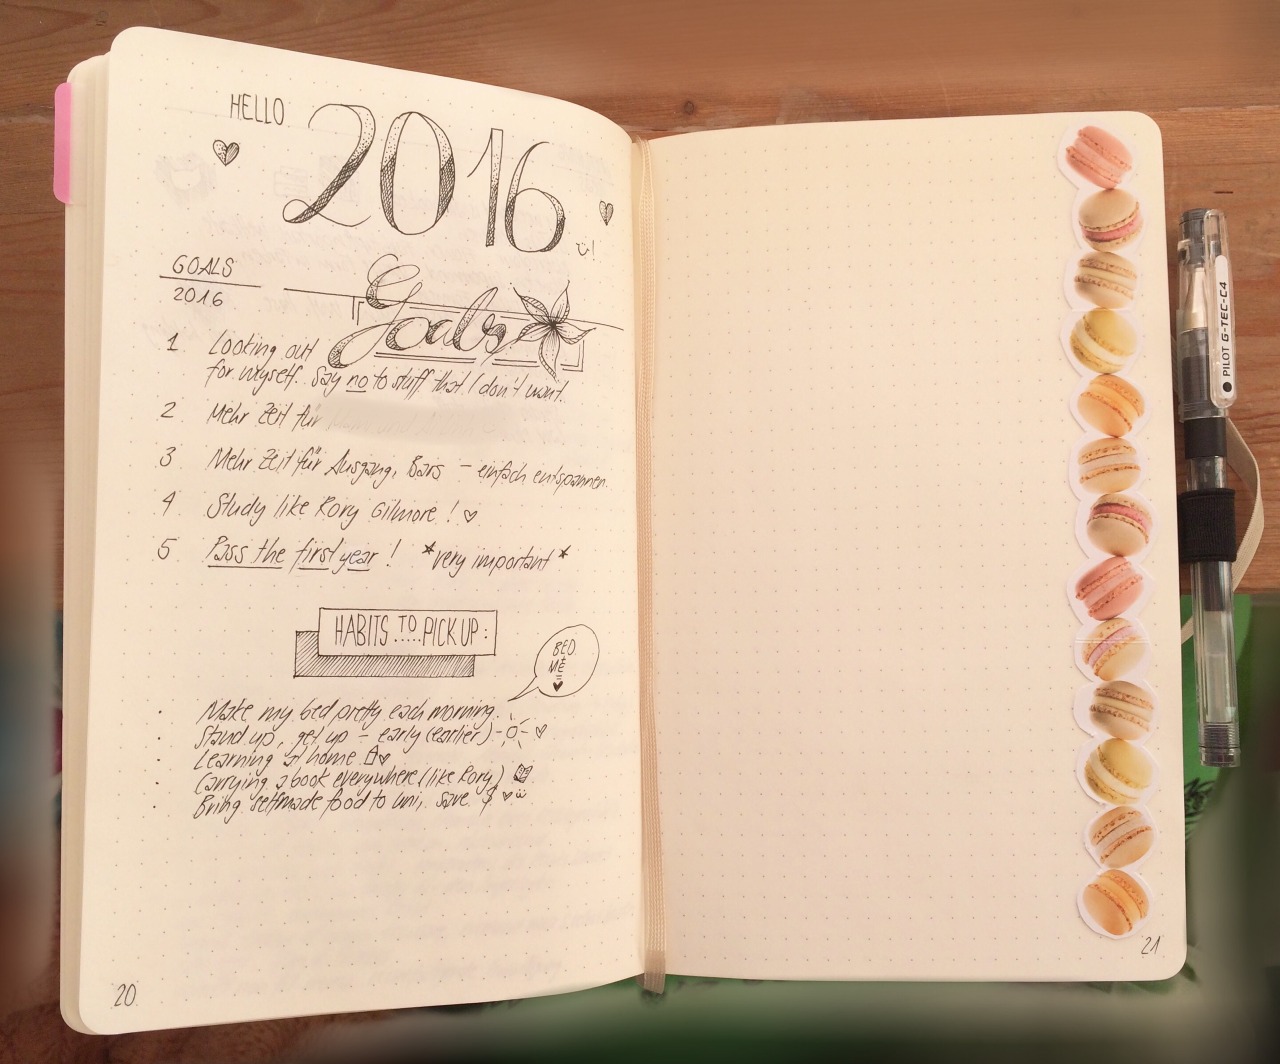 Lawyer Cat's study journey — 27.12.15 || Sunday is bujo day :3 Excited ...